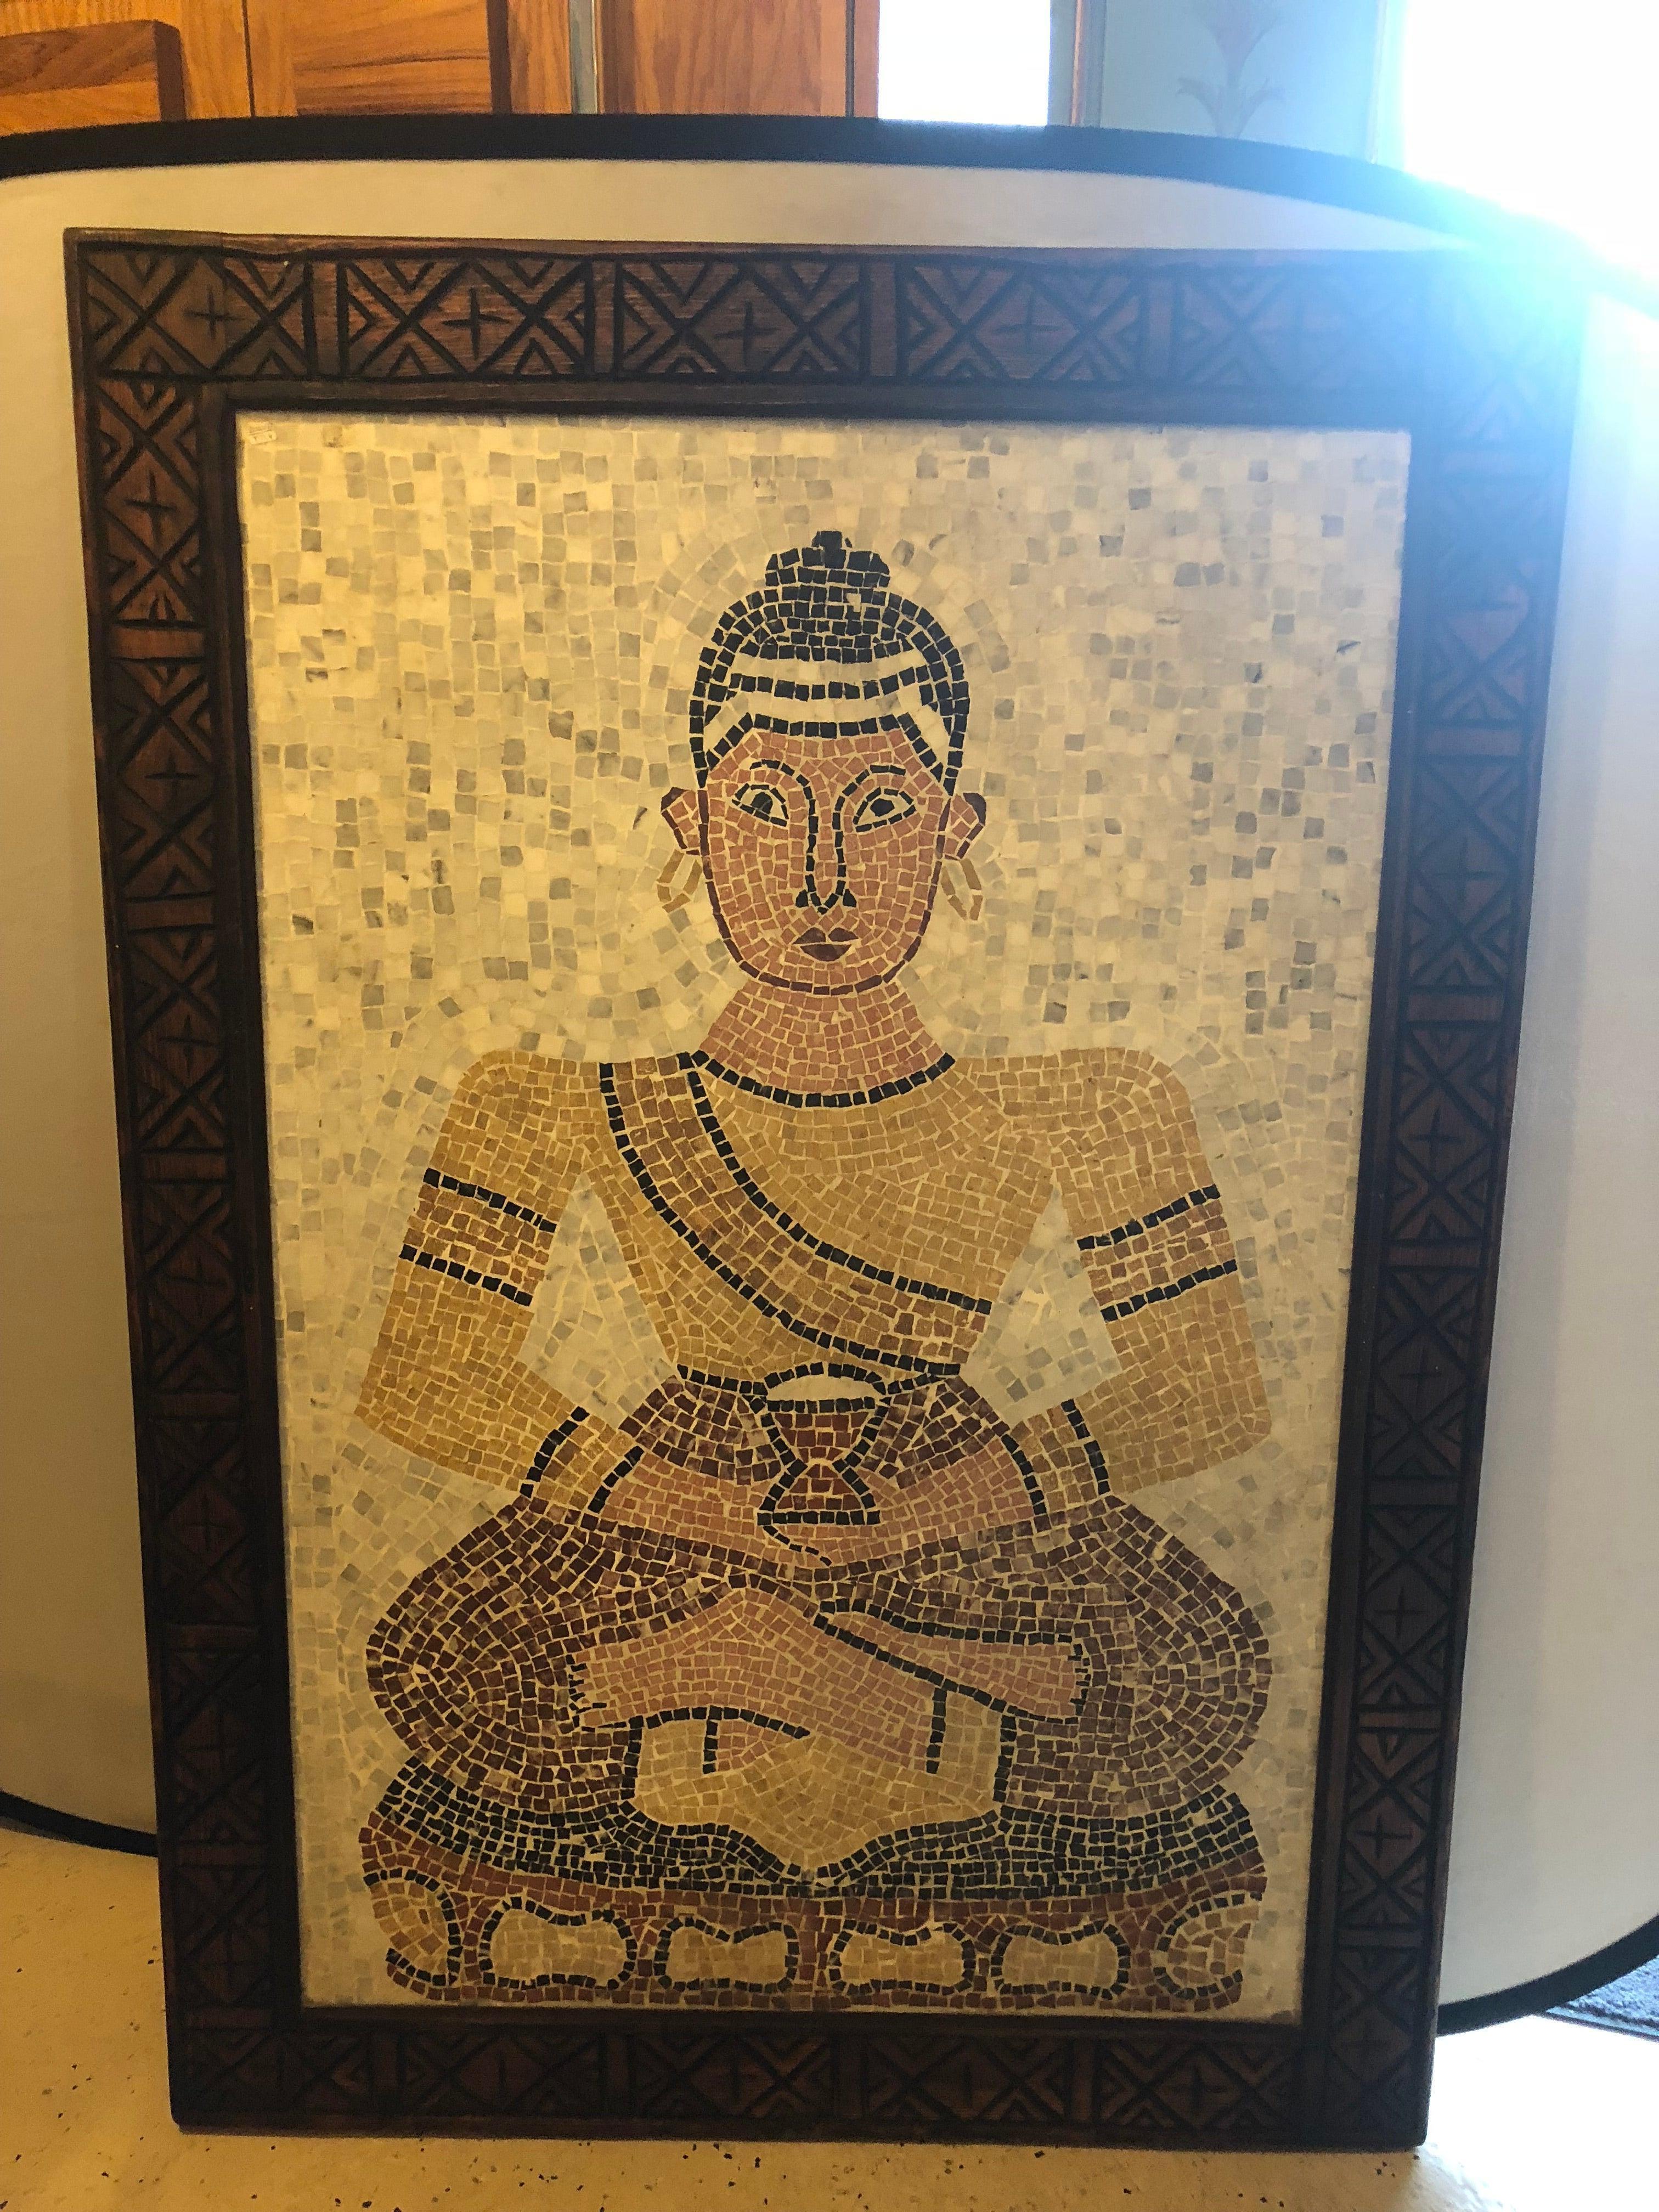 A palatial micro mosaic tile wall plaque of a seated woman holding a goblet in an antiquated wood frame. The wood frame is beautifully carved and the tile alignments of the tiles are the result of outstanding craftsmanship. A lovely room centre